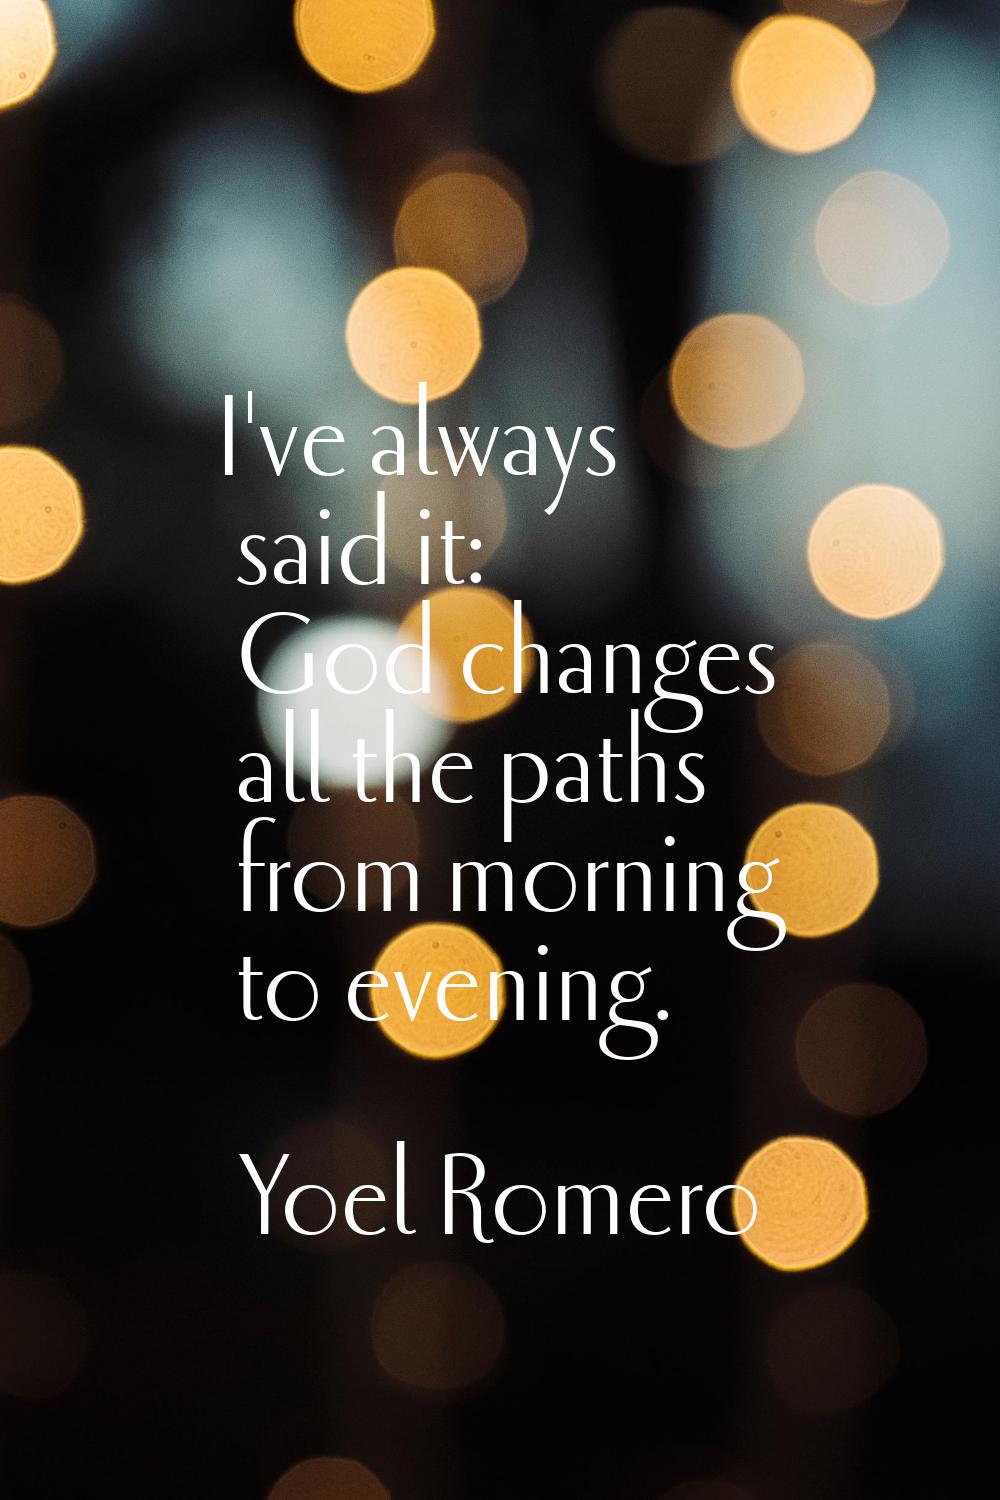 I've always said it: God changes all the paths from morning to evening.